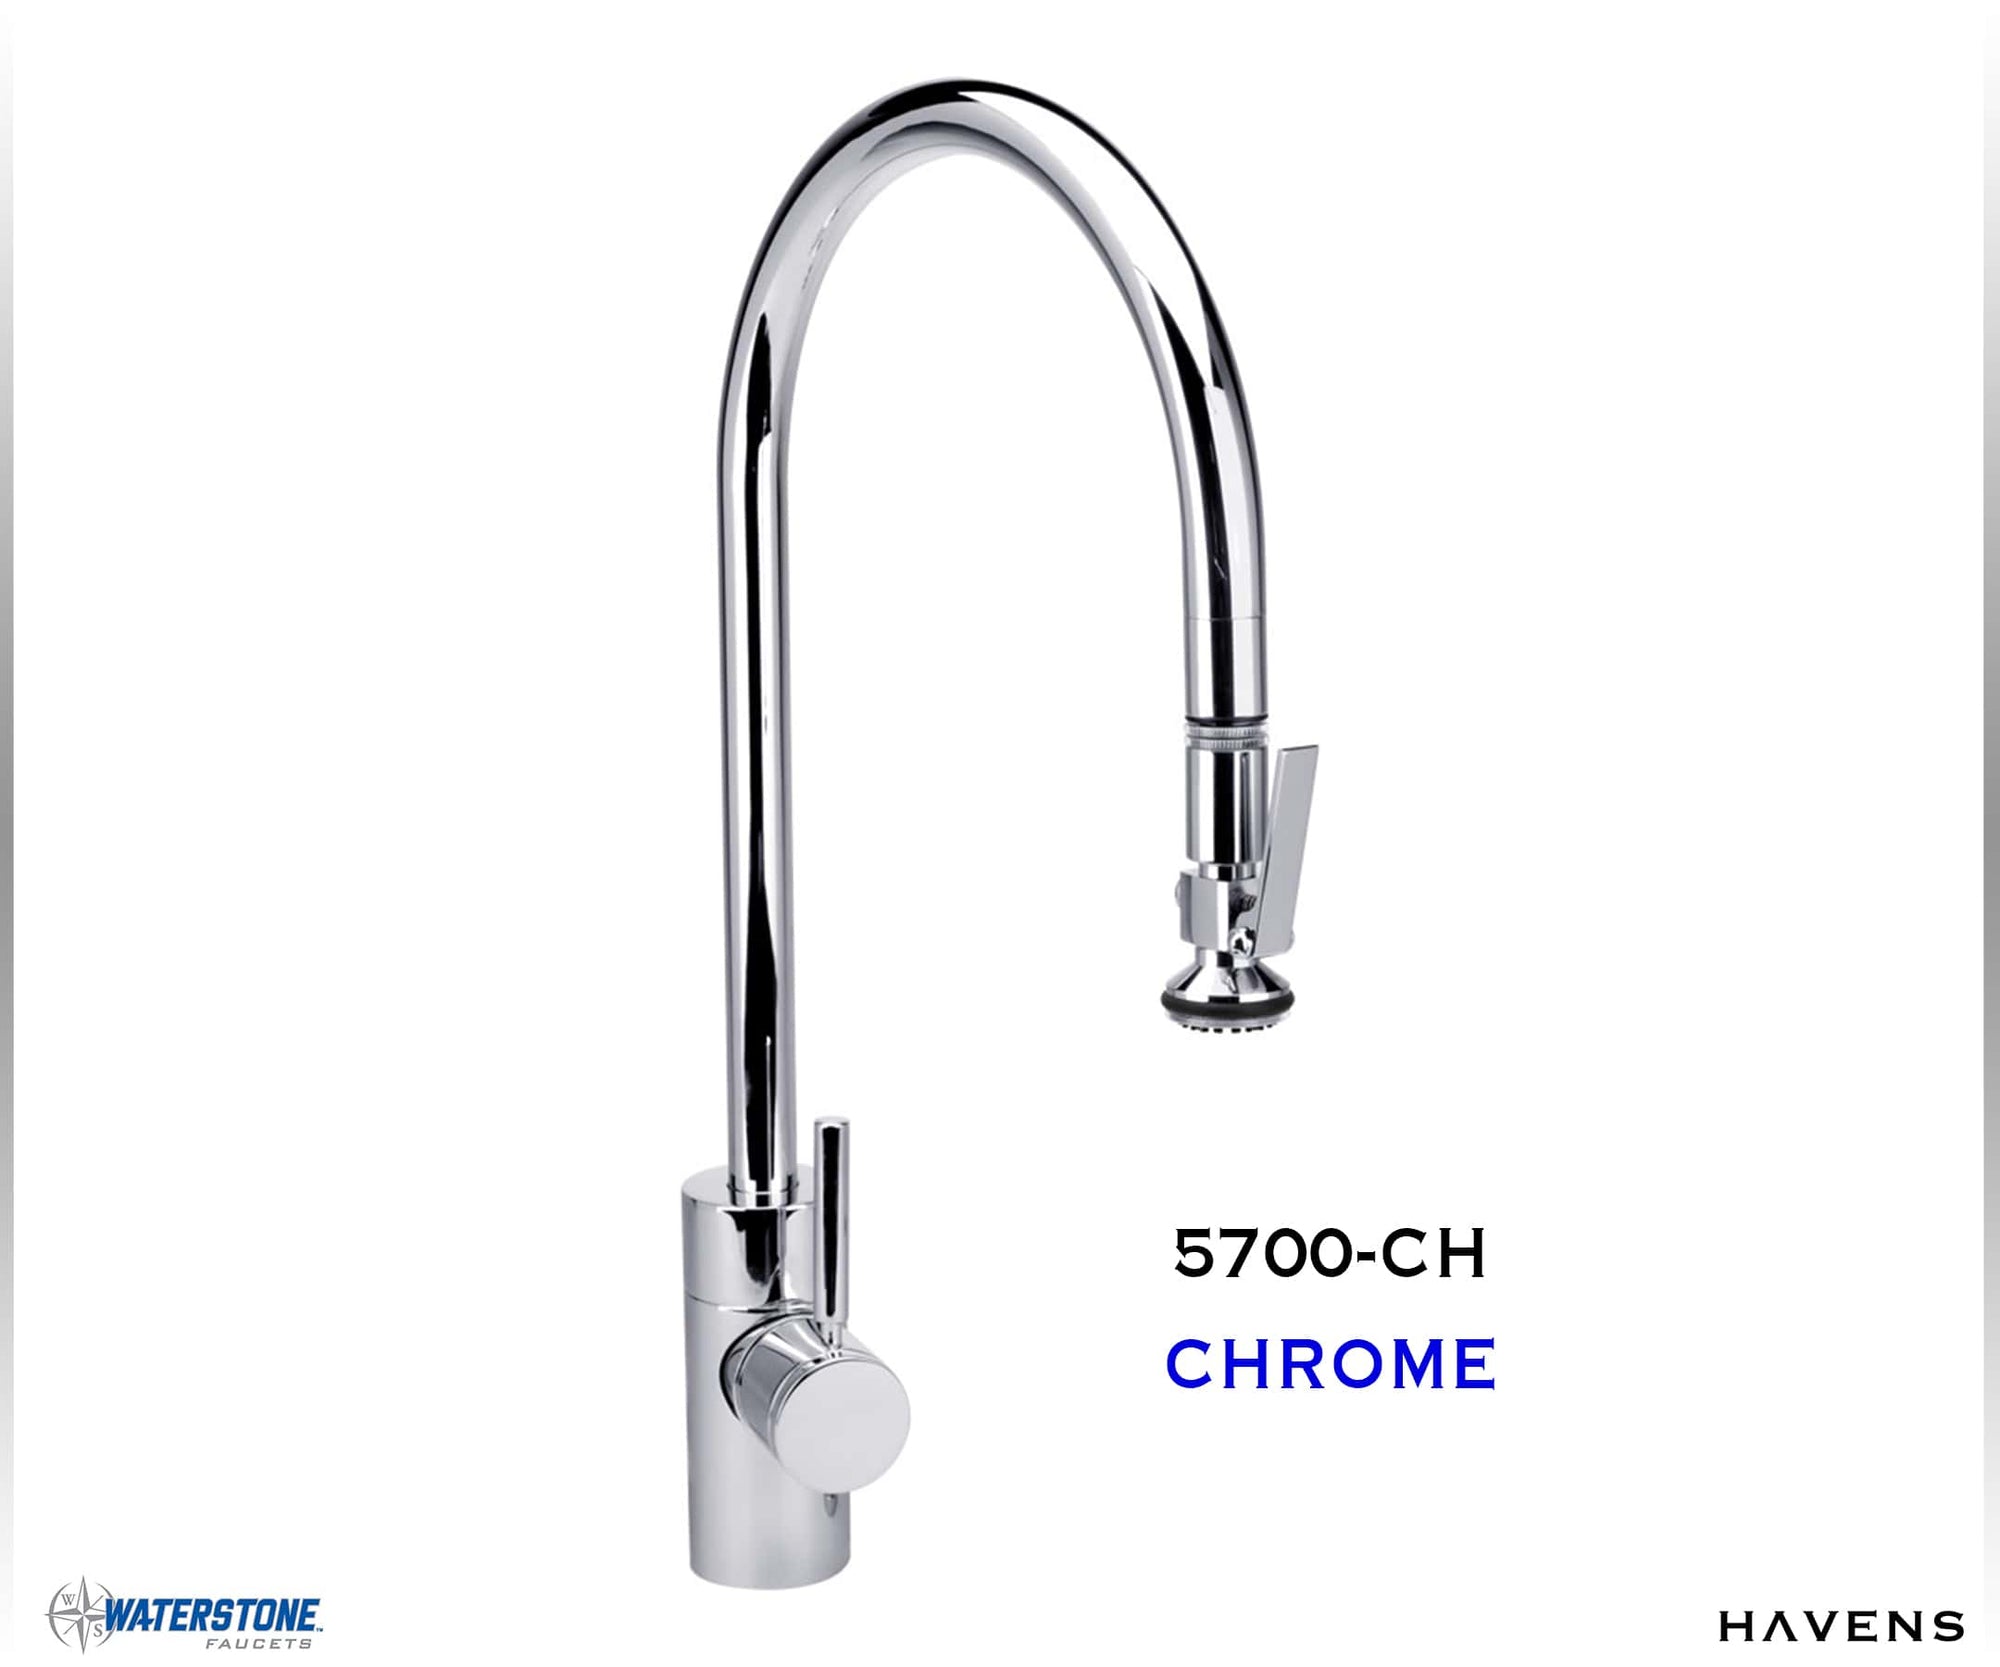 Waterstone Contemporary Extended Reach PLP Pulldown Faucet - 5700